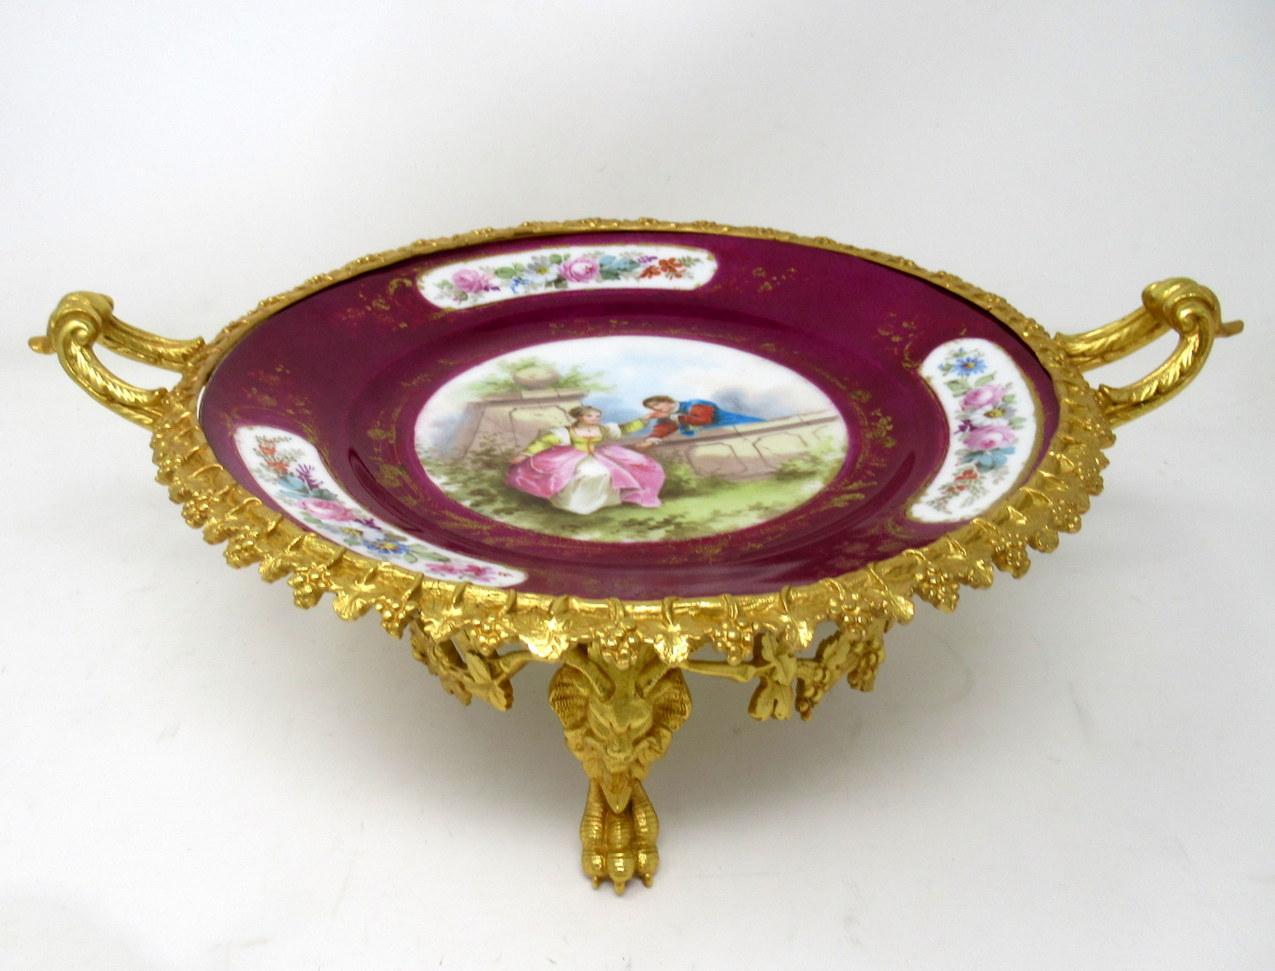 An exceptionally well cast french mounted ormolu and hand painted porcelain sevres circular tazza of traditional form, possible from the third quarter of the 19th century. 

The central reserve with hand painted decoration depicting a Romantic